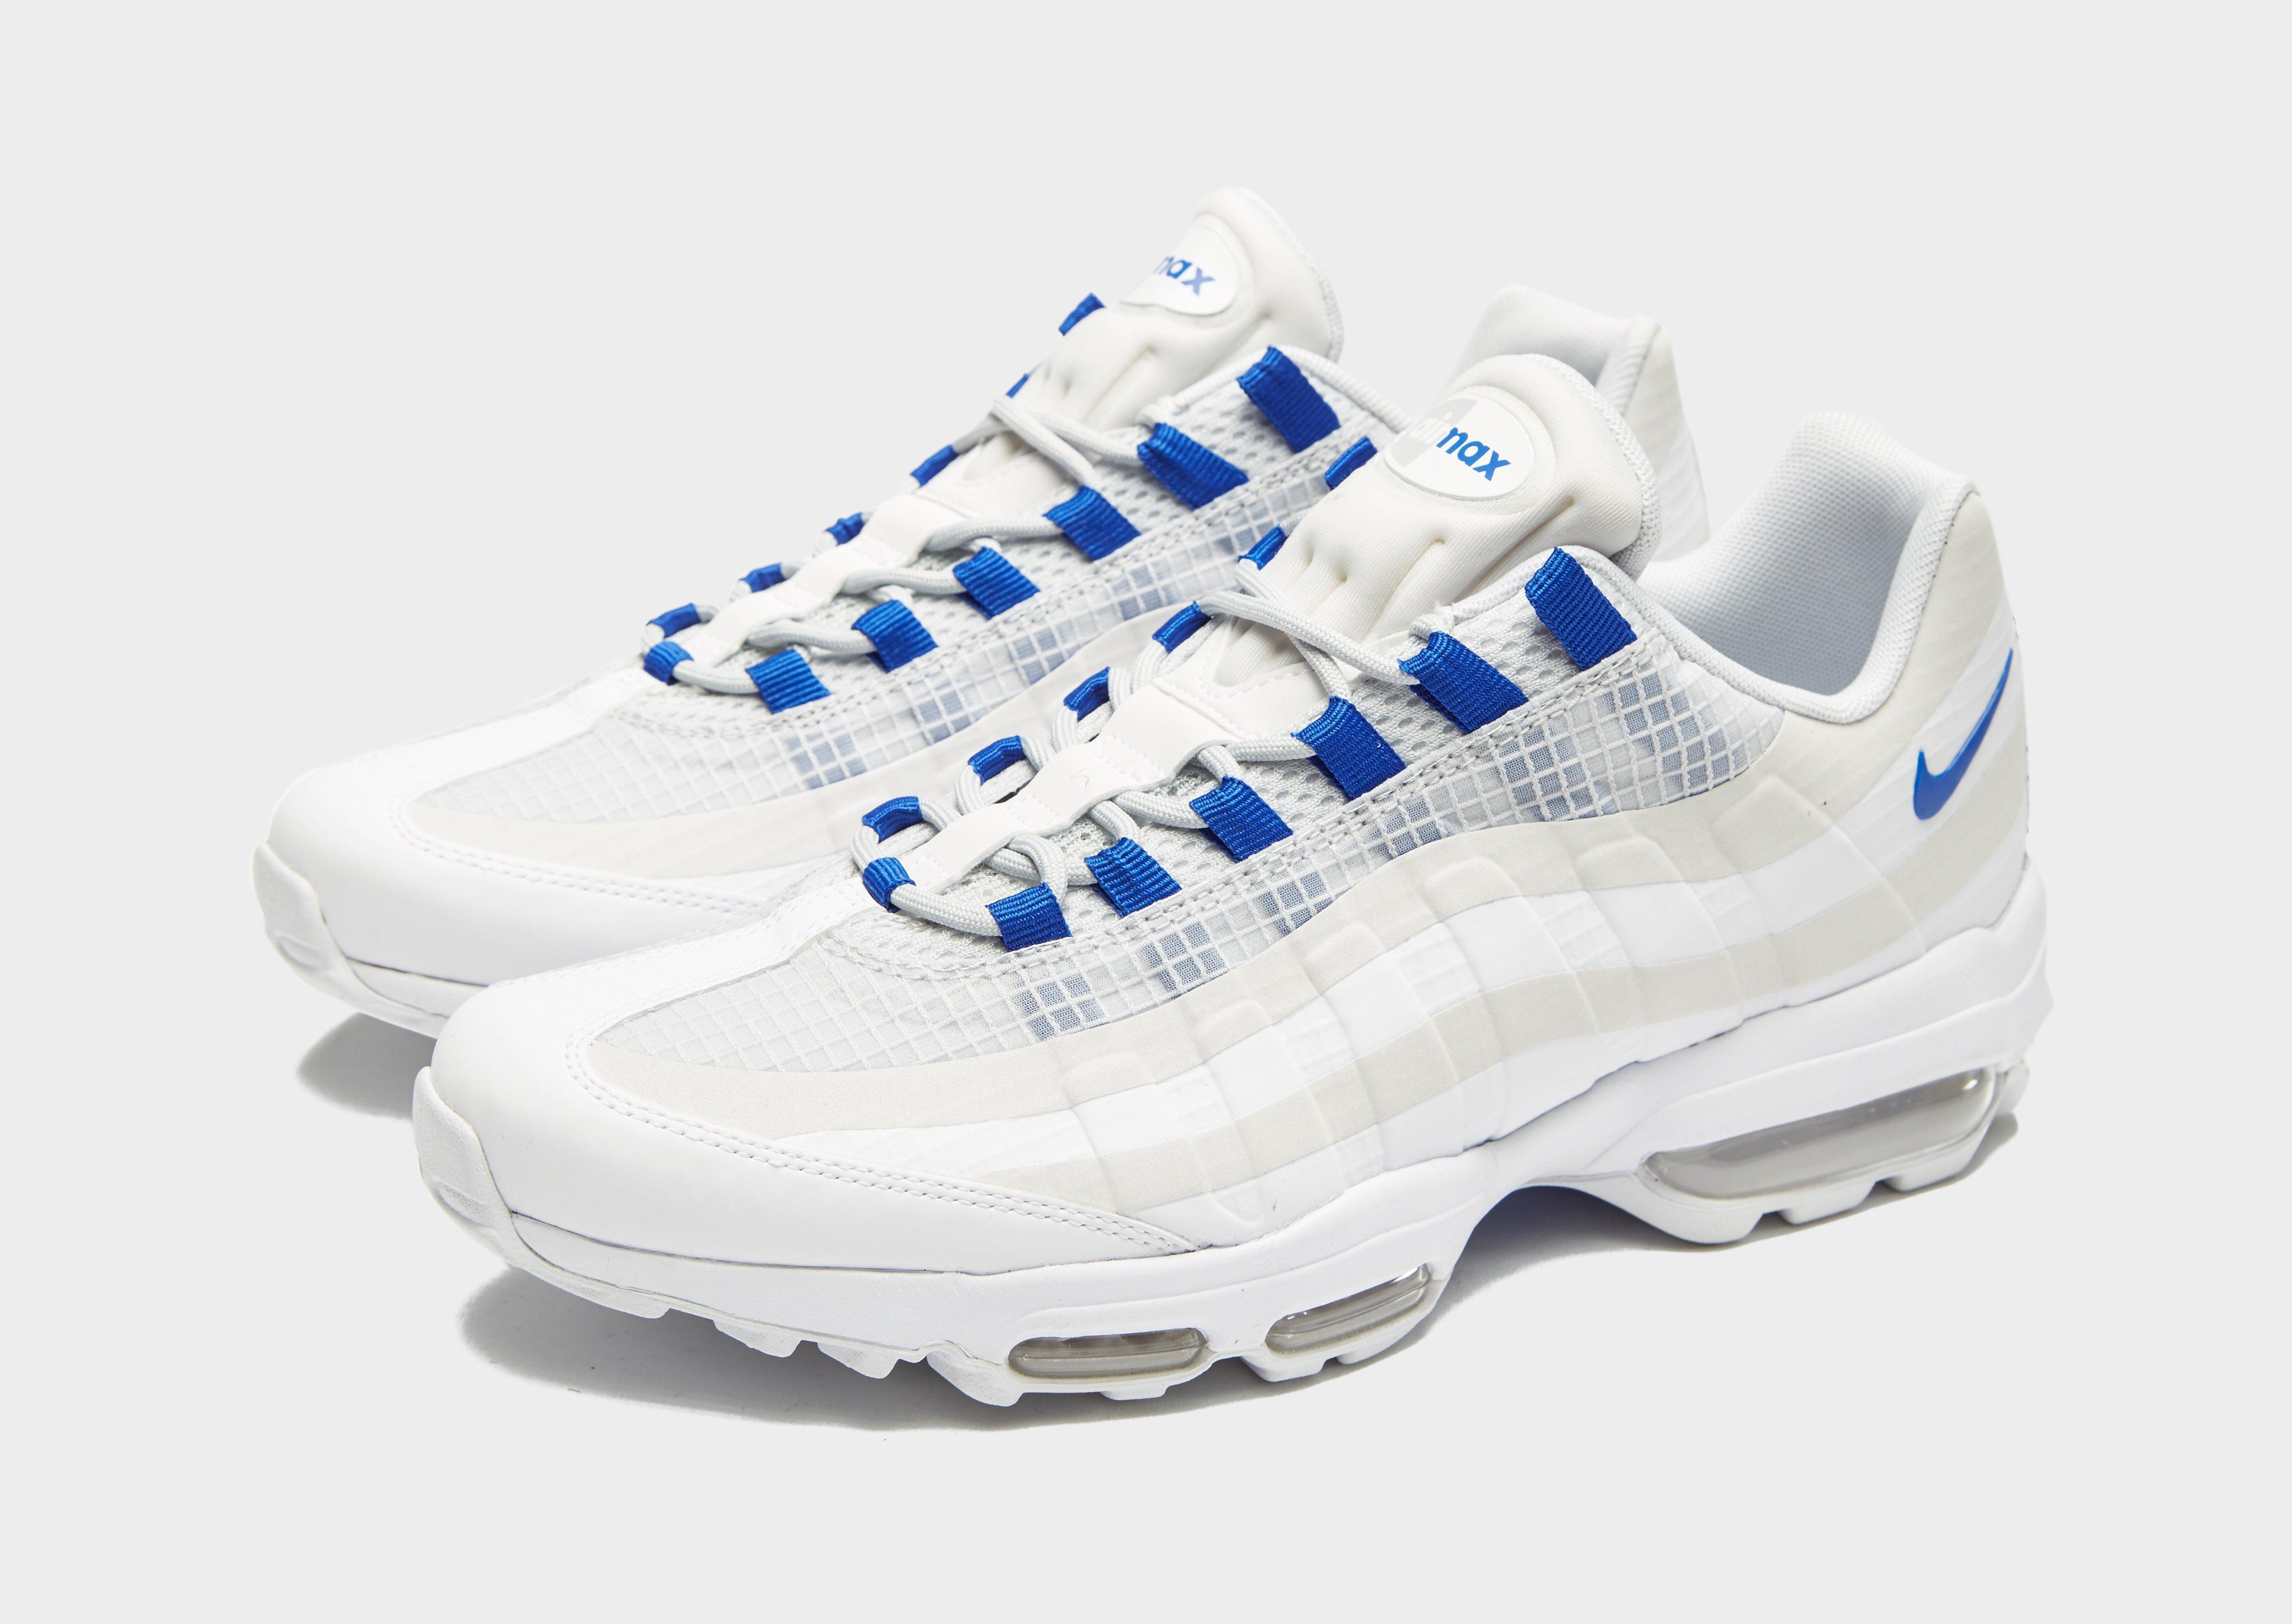 Lyst - Nike Air Max 95 Ultra Se in White for Men